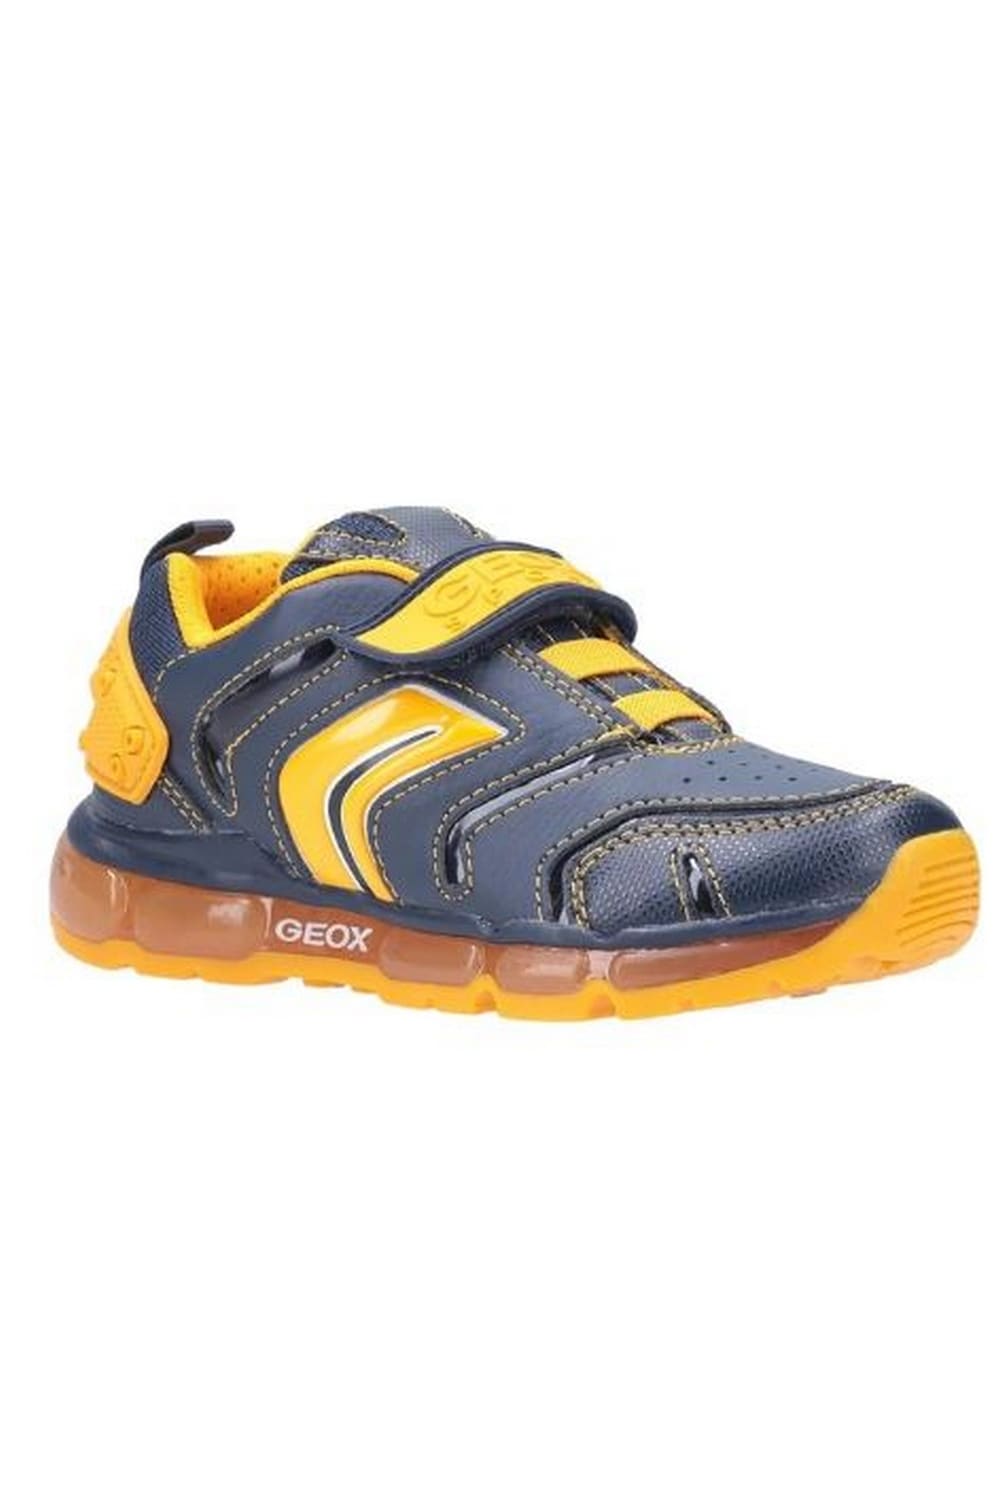 Geox Boys J Android B Touch Fastening Sneaker (Navy/Dark Yellow)